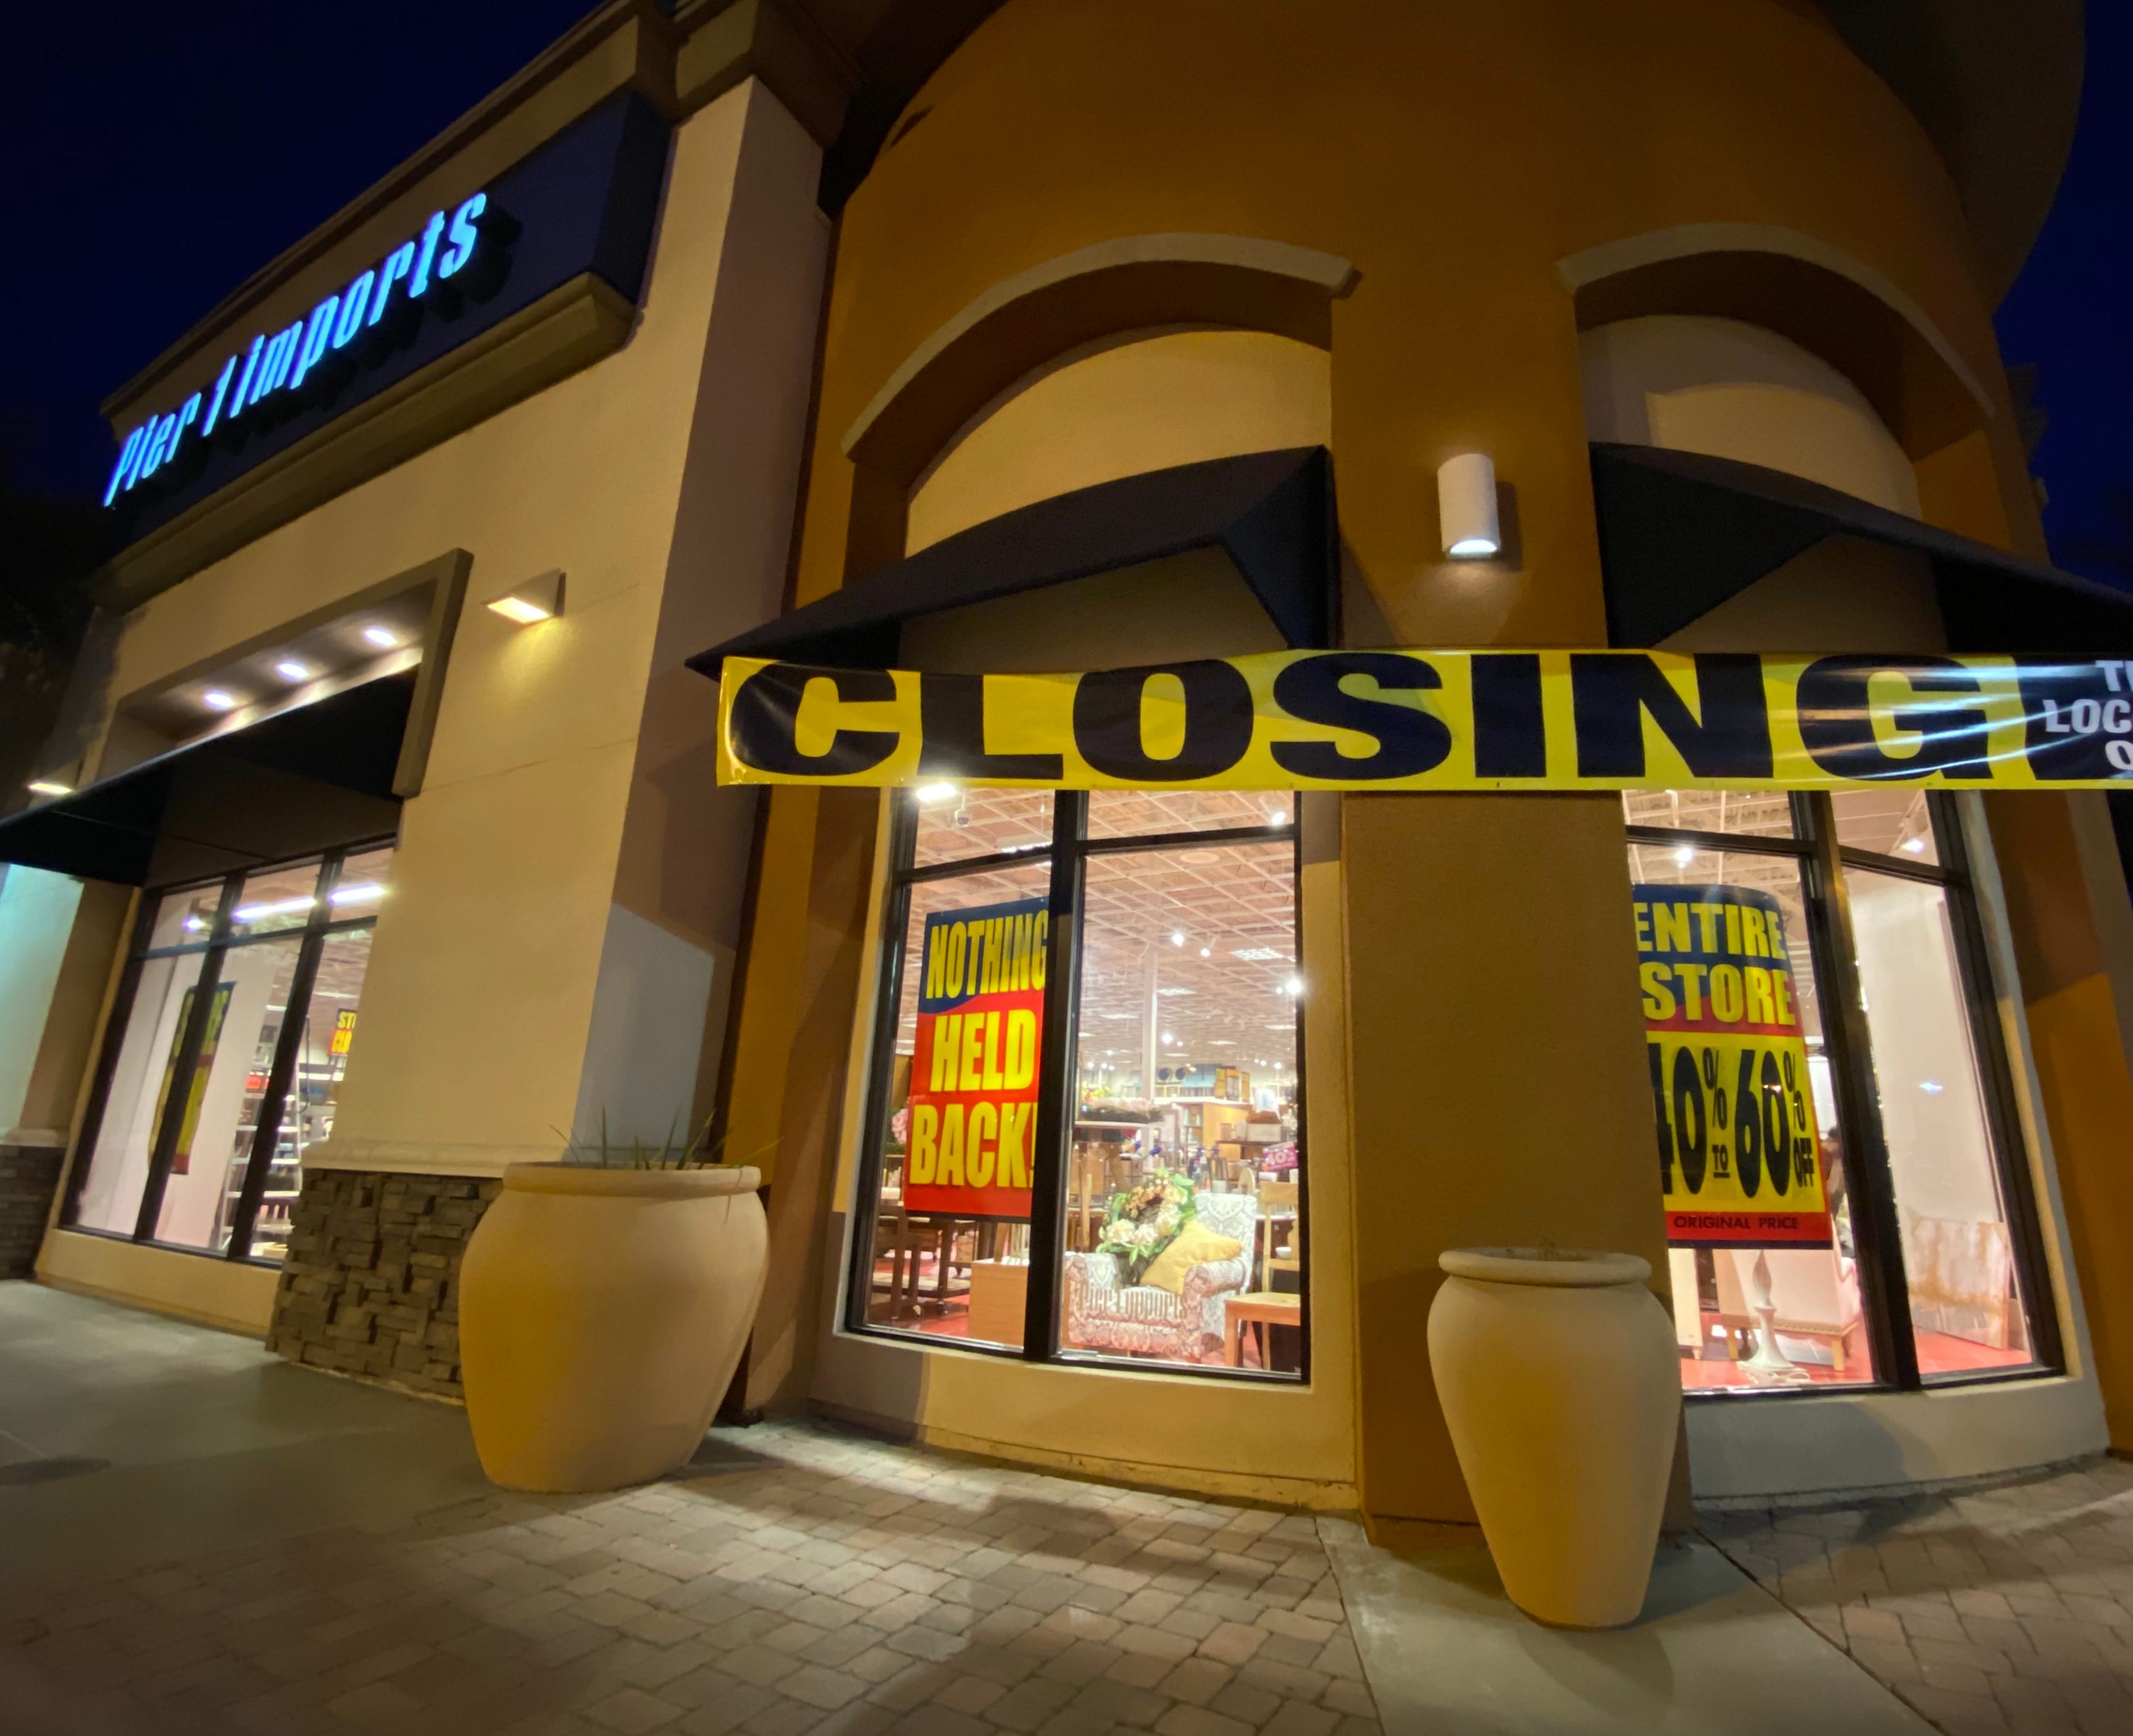 Pier 1 Imports Store Closings These Locations Will Shutter Soon